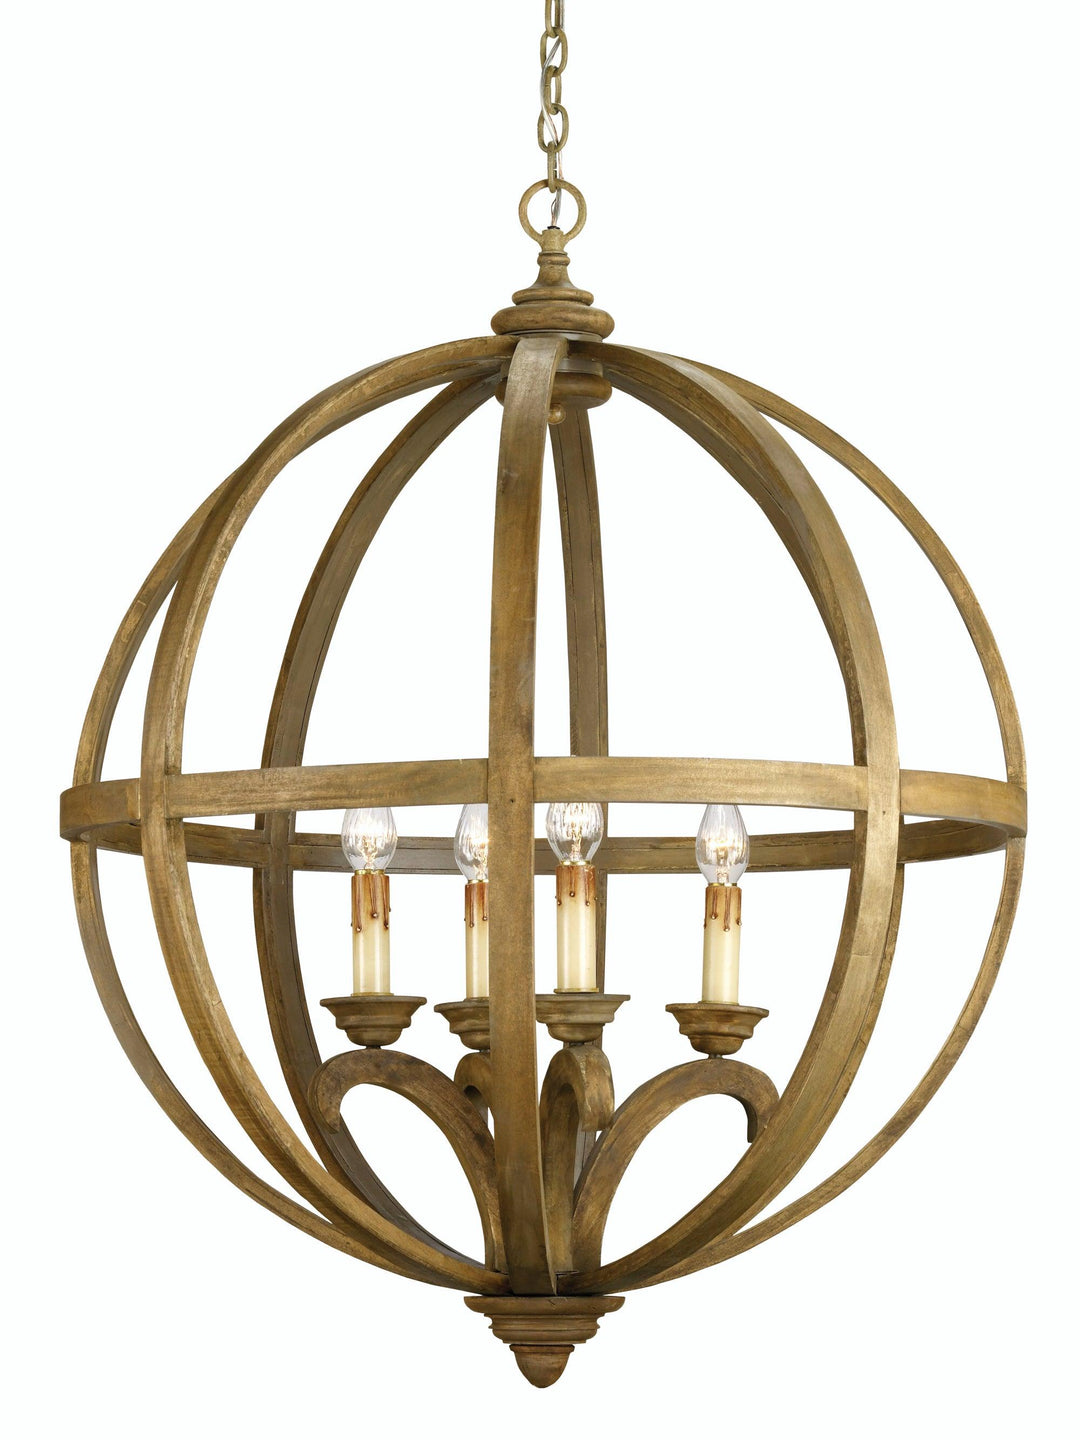 Axel Large Orb Chandelier - Casey & Company